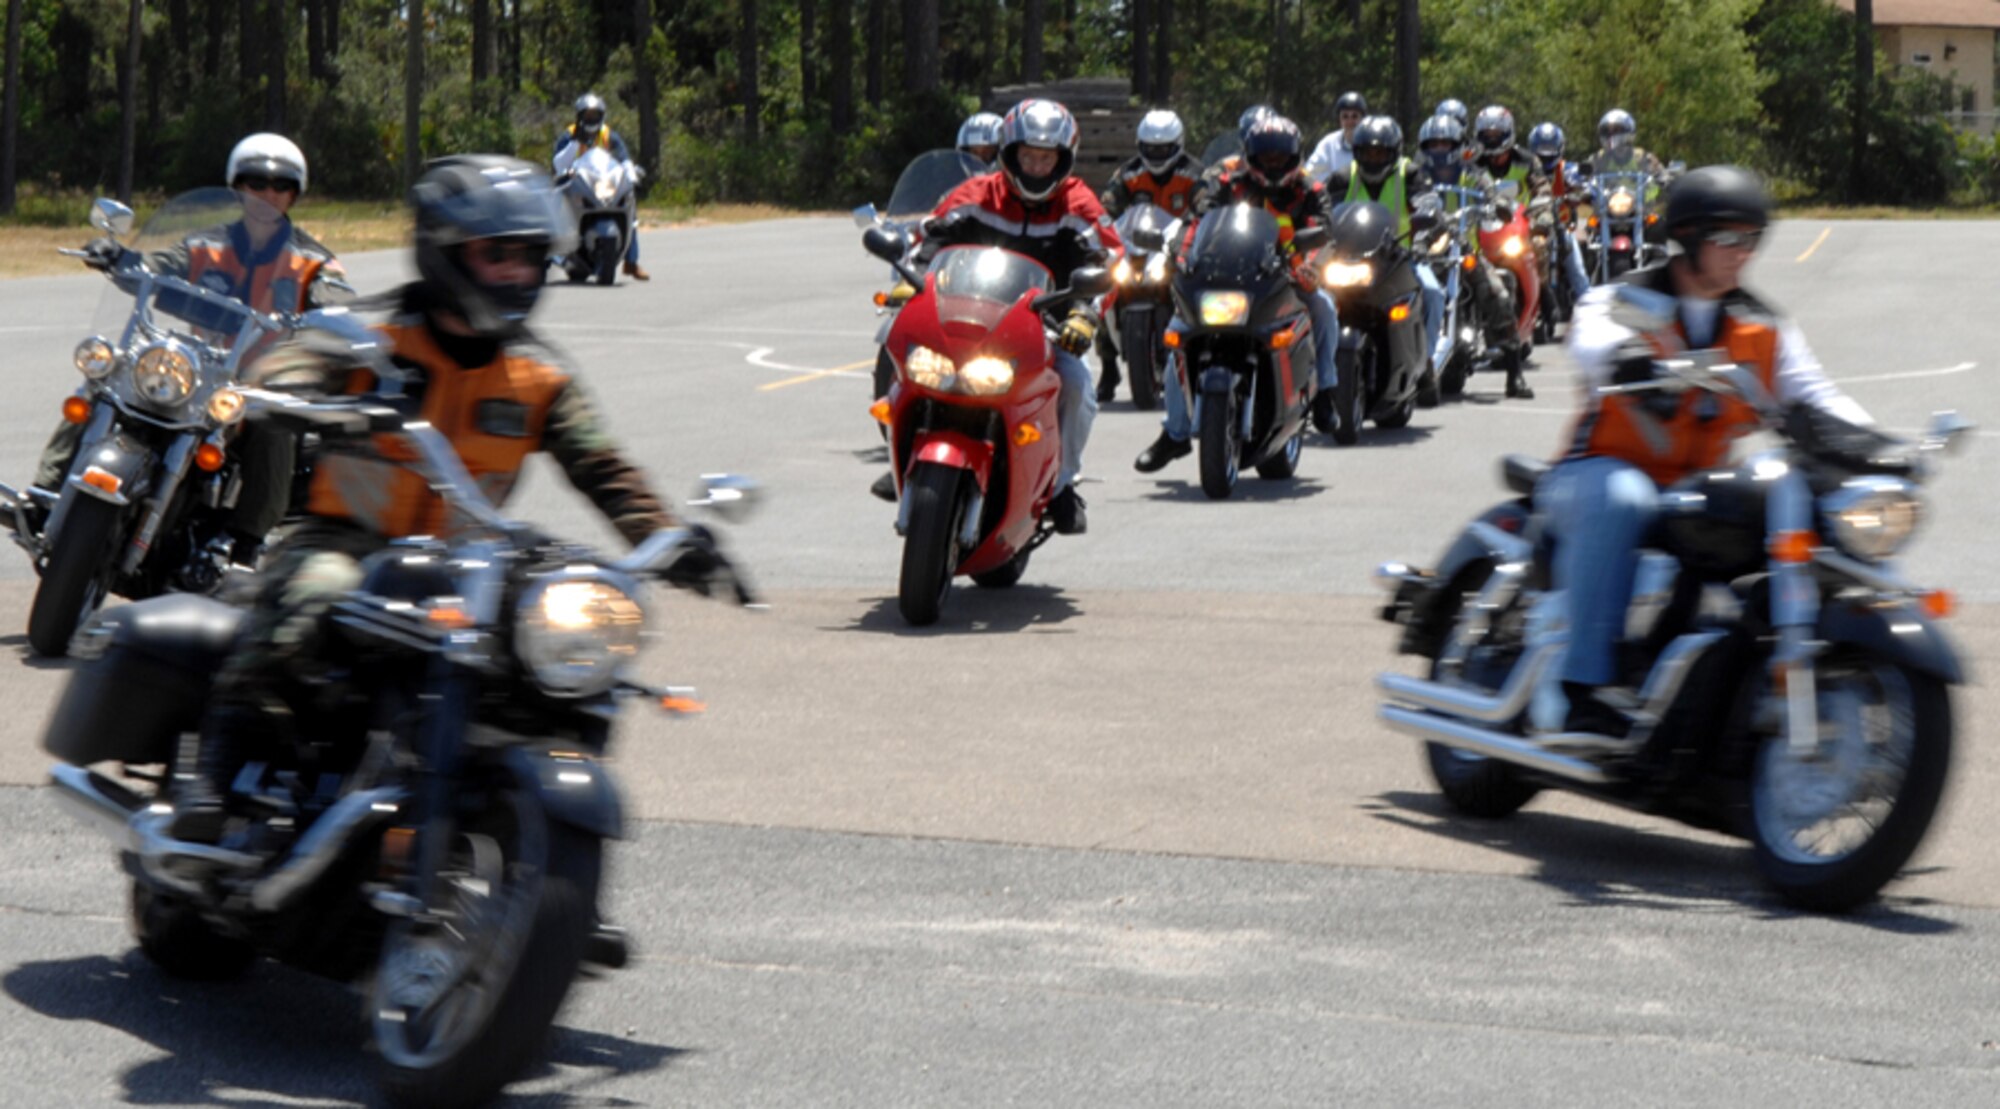 Motorcyclists head out on the annual Hurlburt Field Motorcycle Rally June 8. (U.S. Air Force photo by Senior Airman Stephanie Jacobs)